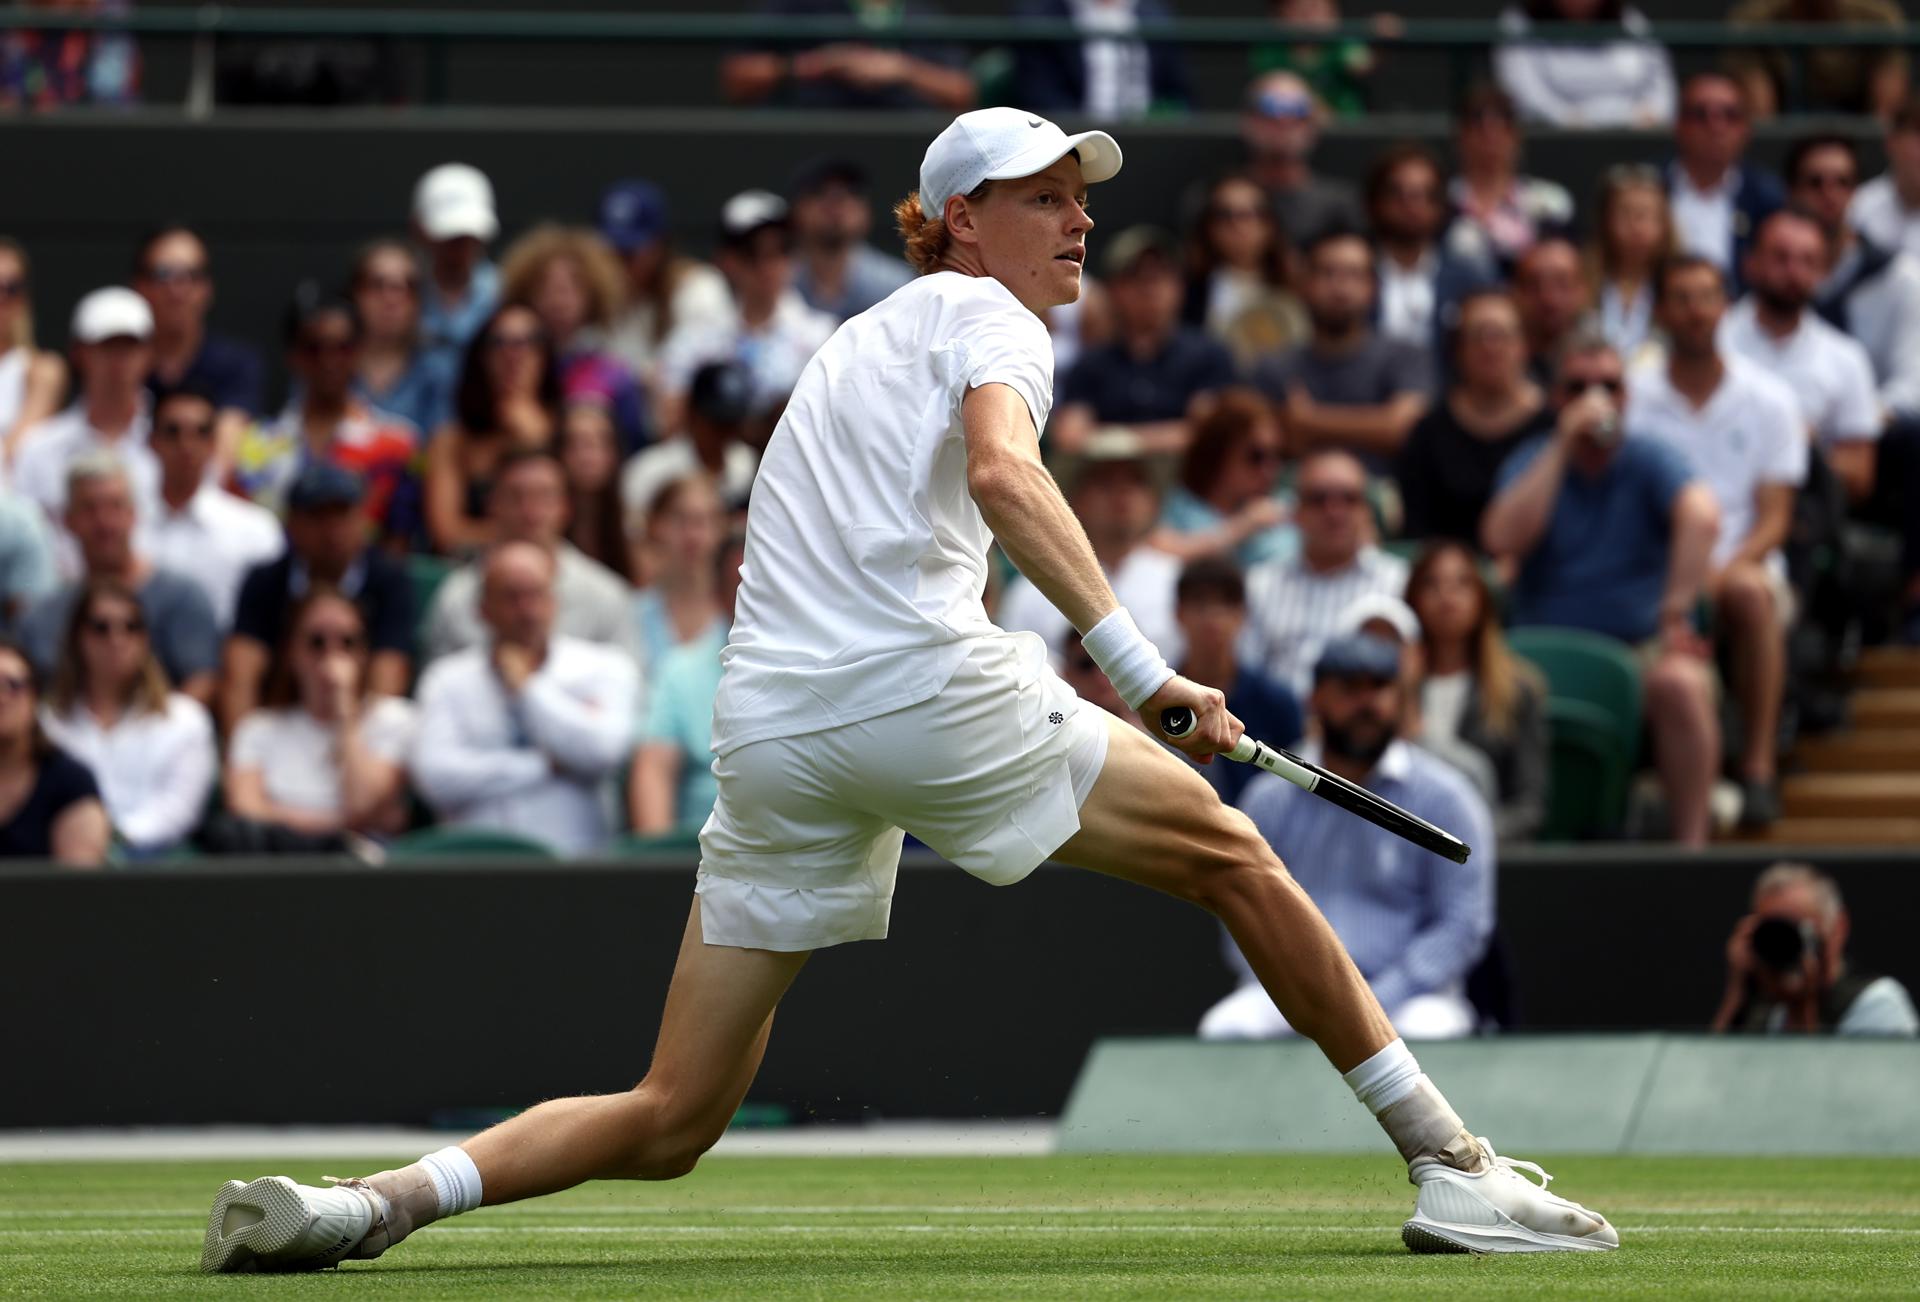 Jannik Sinner plays Daniel Elahi Galan in the 4th round of the Wimbledon Championships in London on 9 July 2023. EFE/EPA/ADAM VAUGHAN/EDITORIAL USE ONLY
